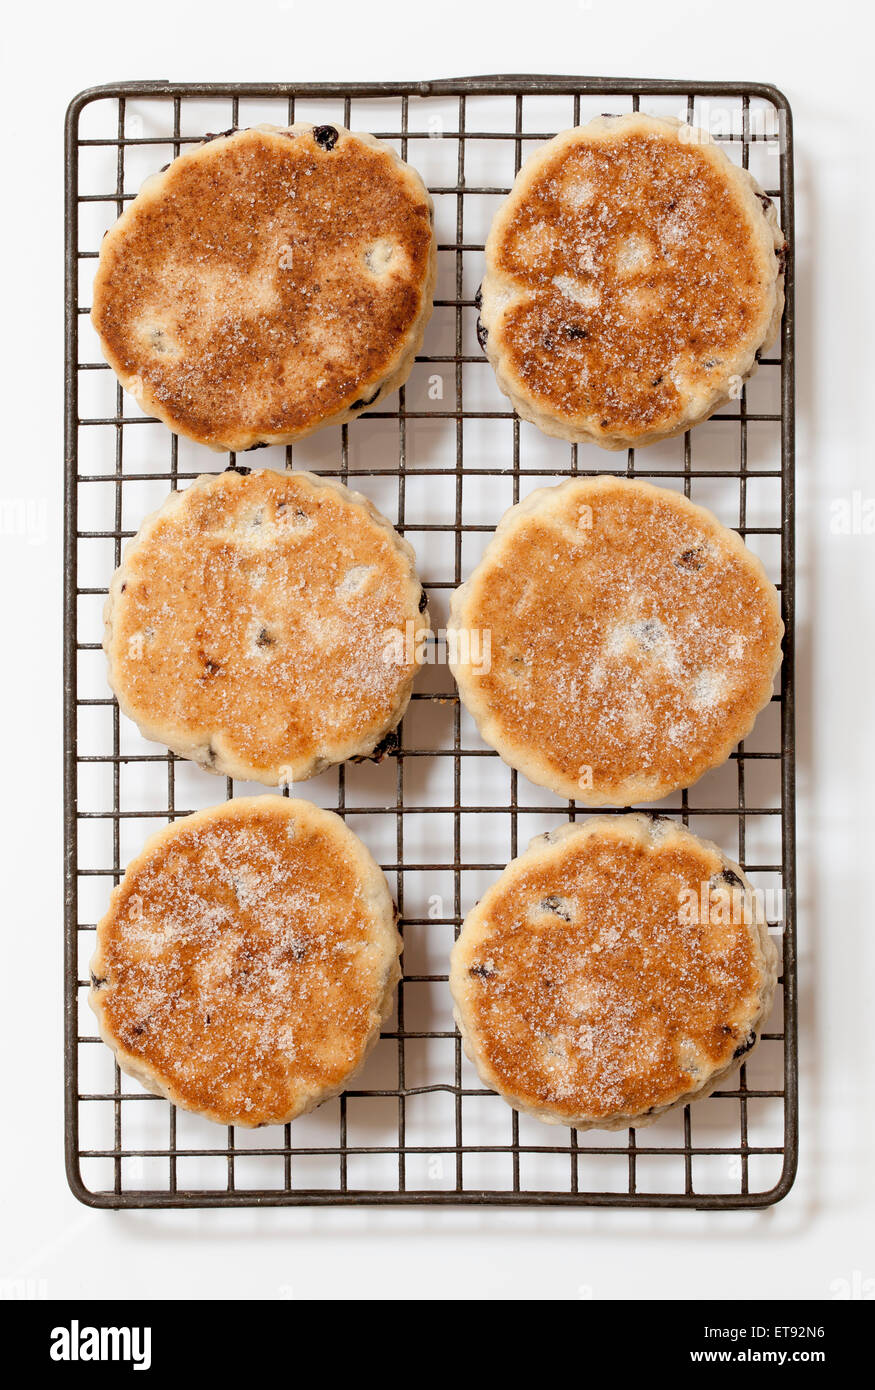 Welsh cakes or Welshcakes (or pics) - a traditional food delicacy in Wales Stock Photo